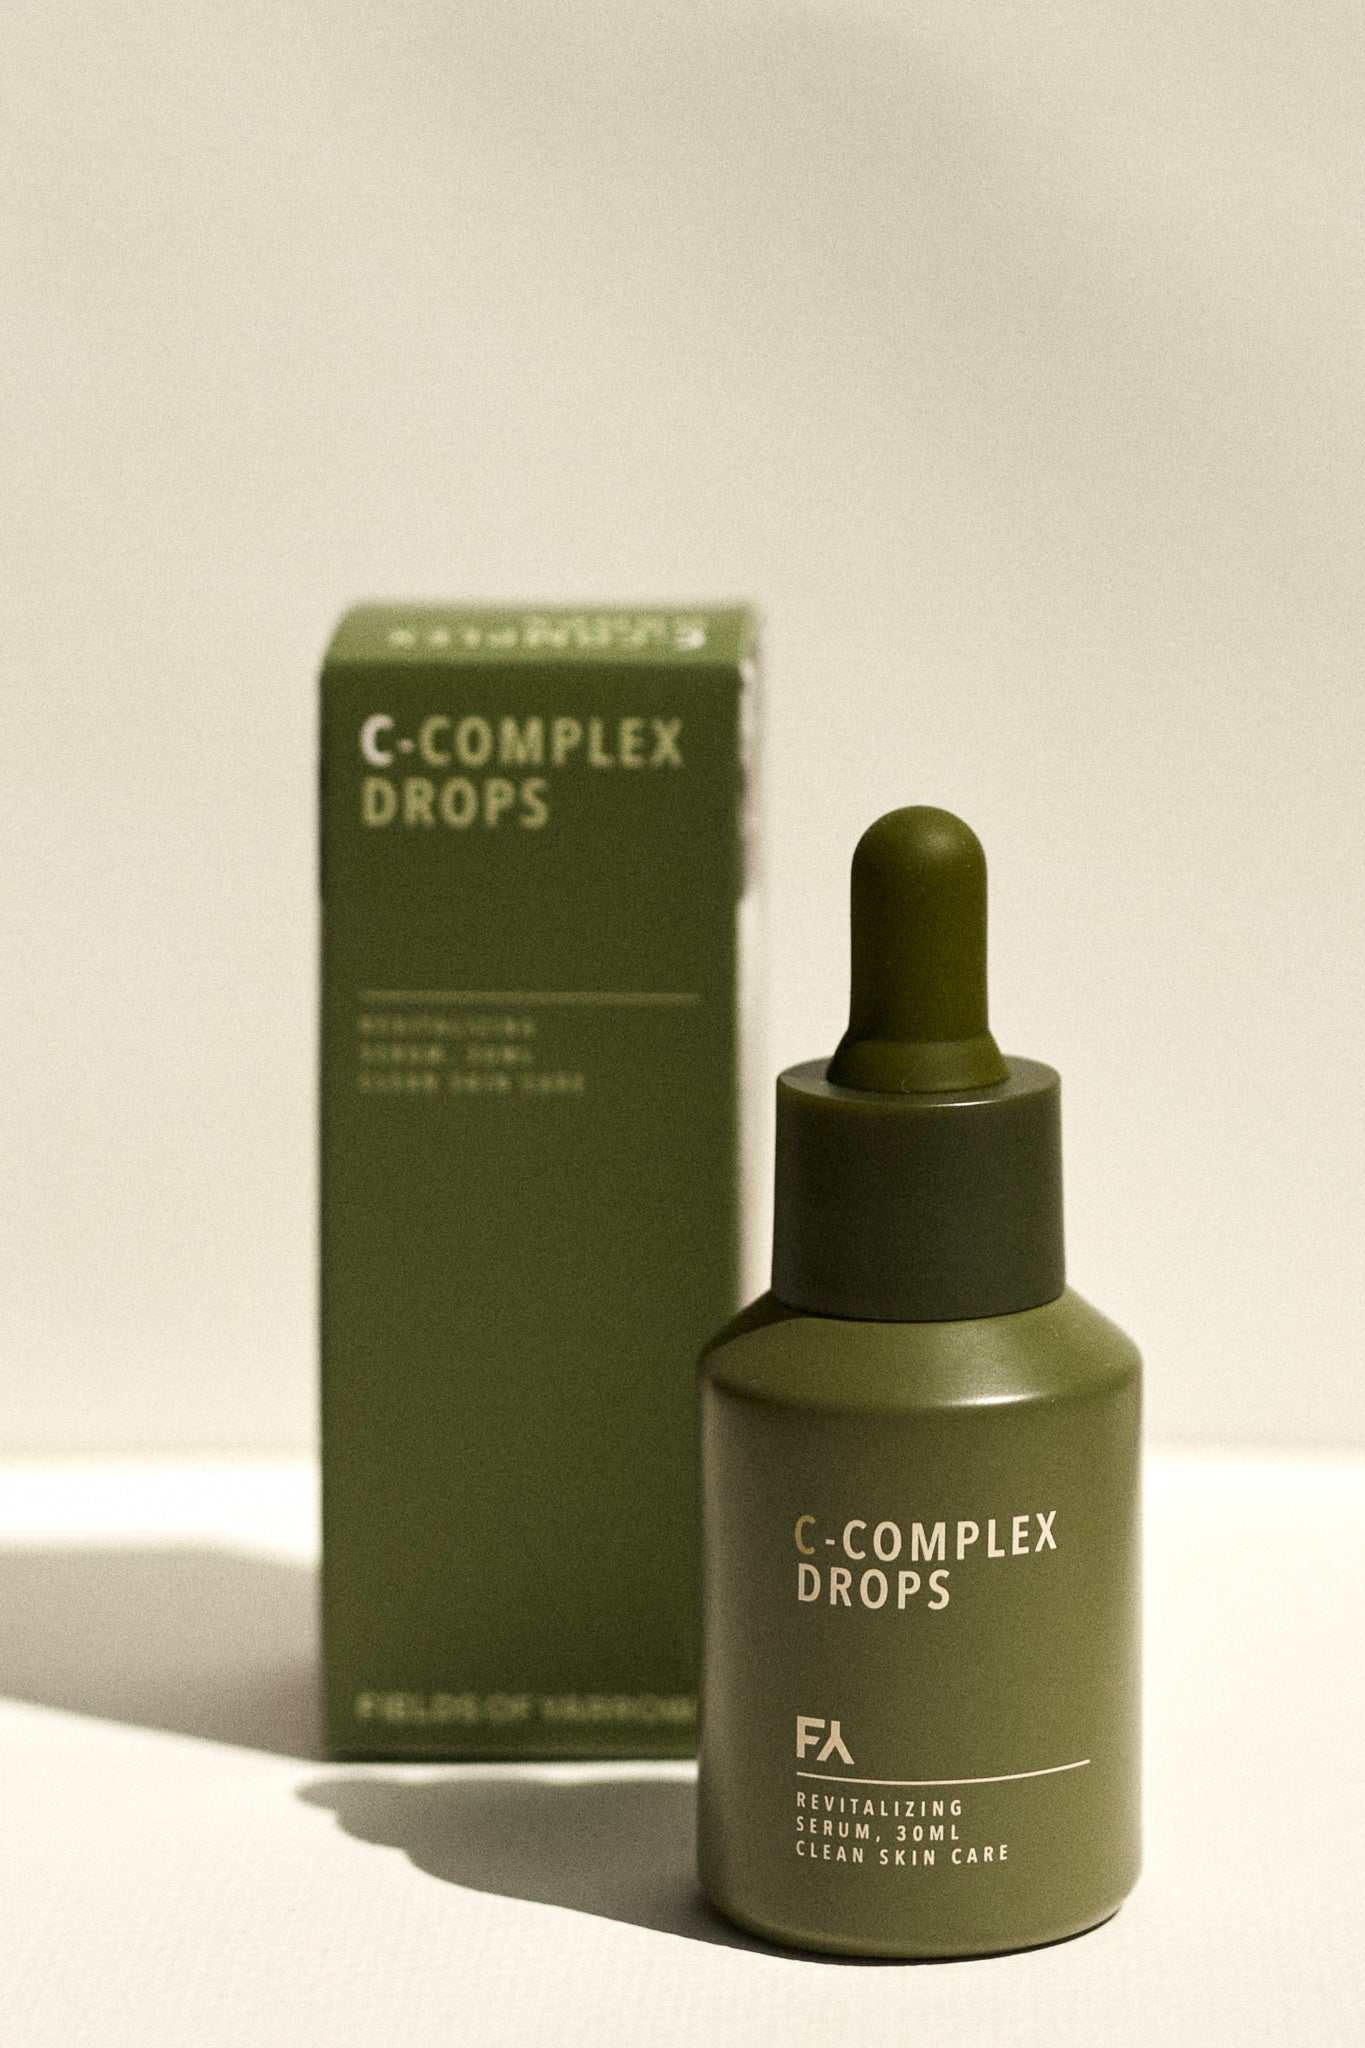 Campaign shot of the C-Complex Drops Revitalizing Serum by Fields of Yarrow next to its packaging